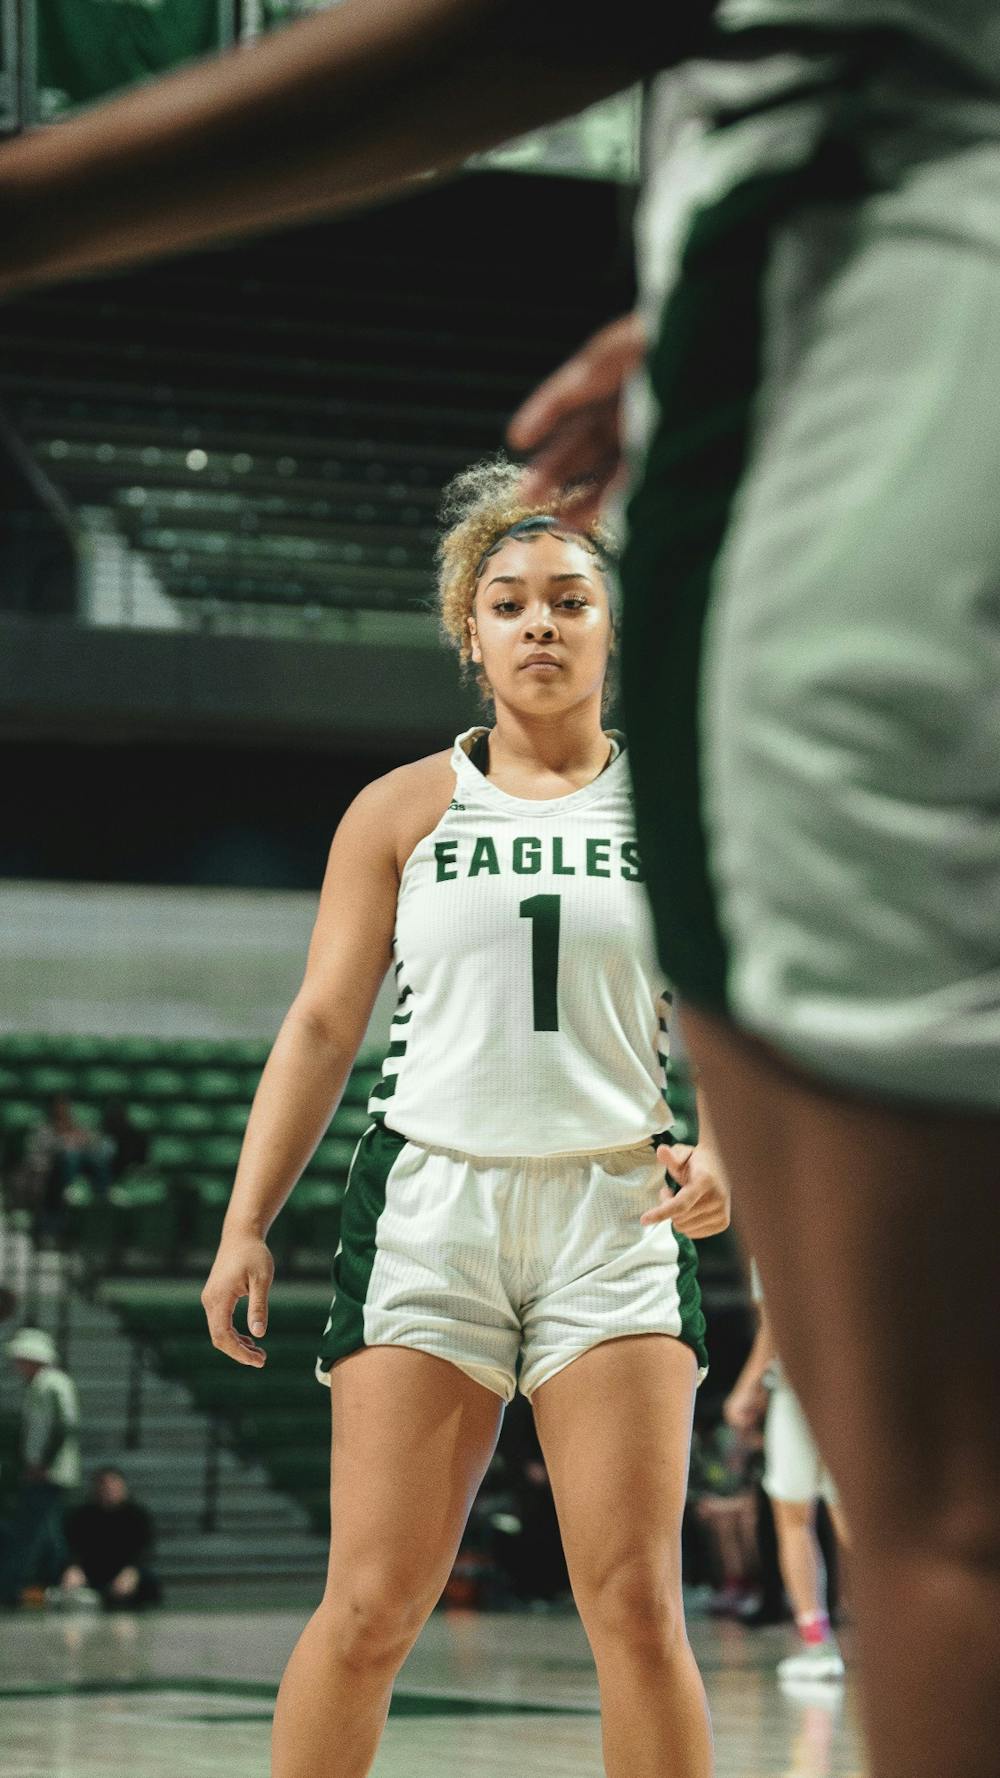  Eke tallies third double-double of season; women's basketball falls on the road at Bowling Green for second straight loss 